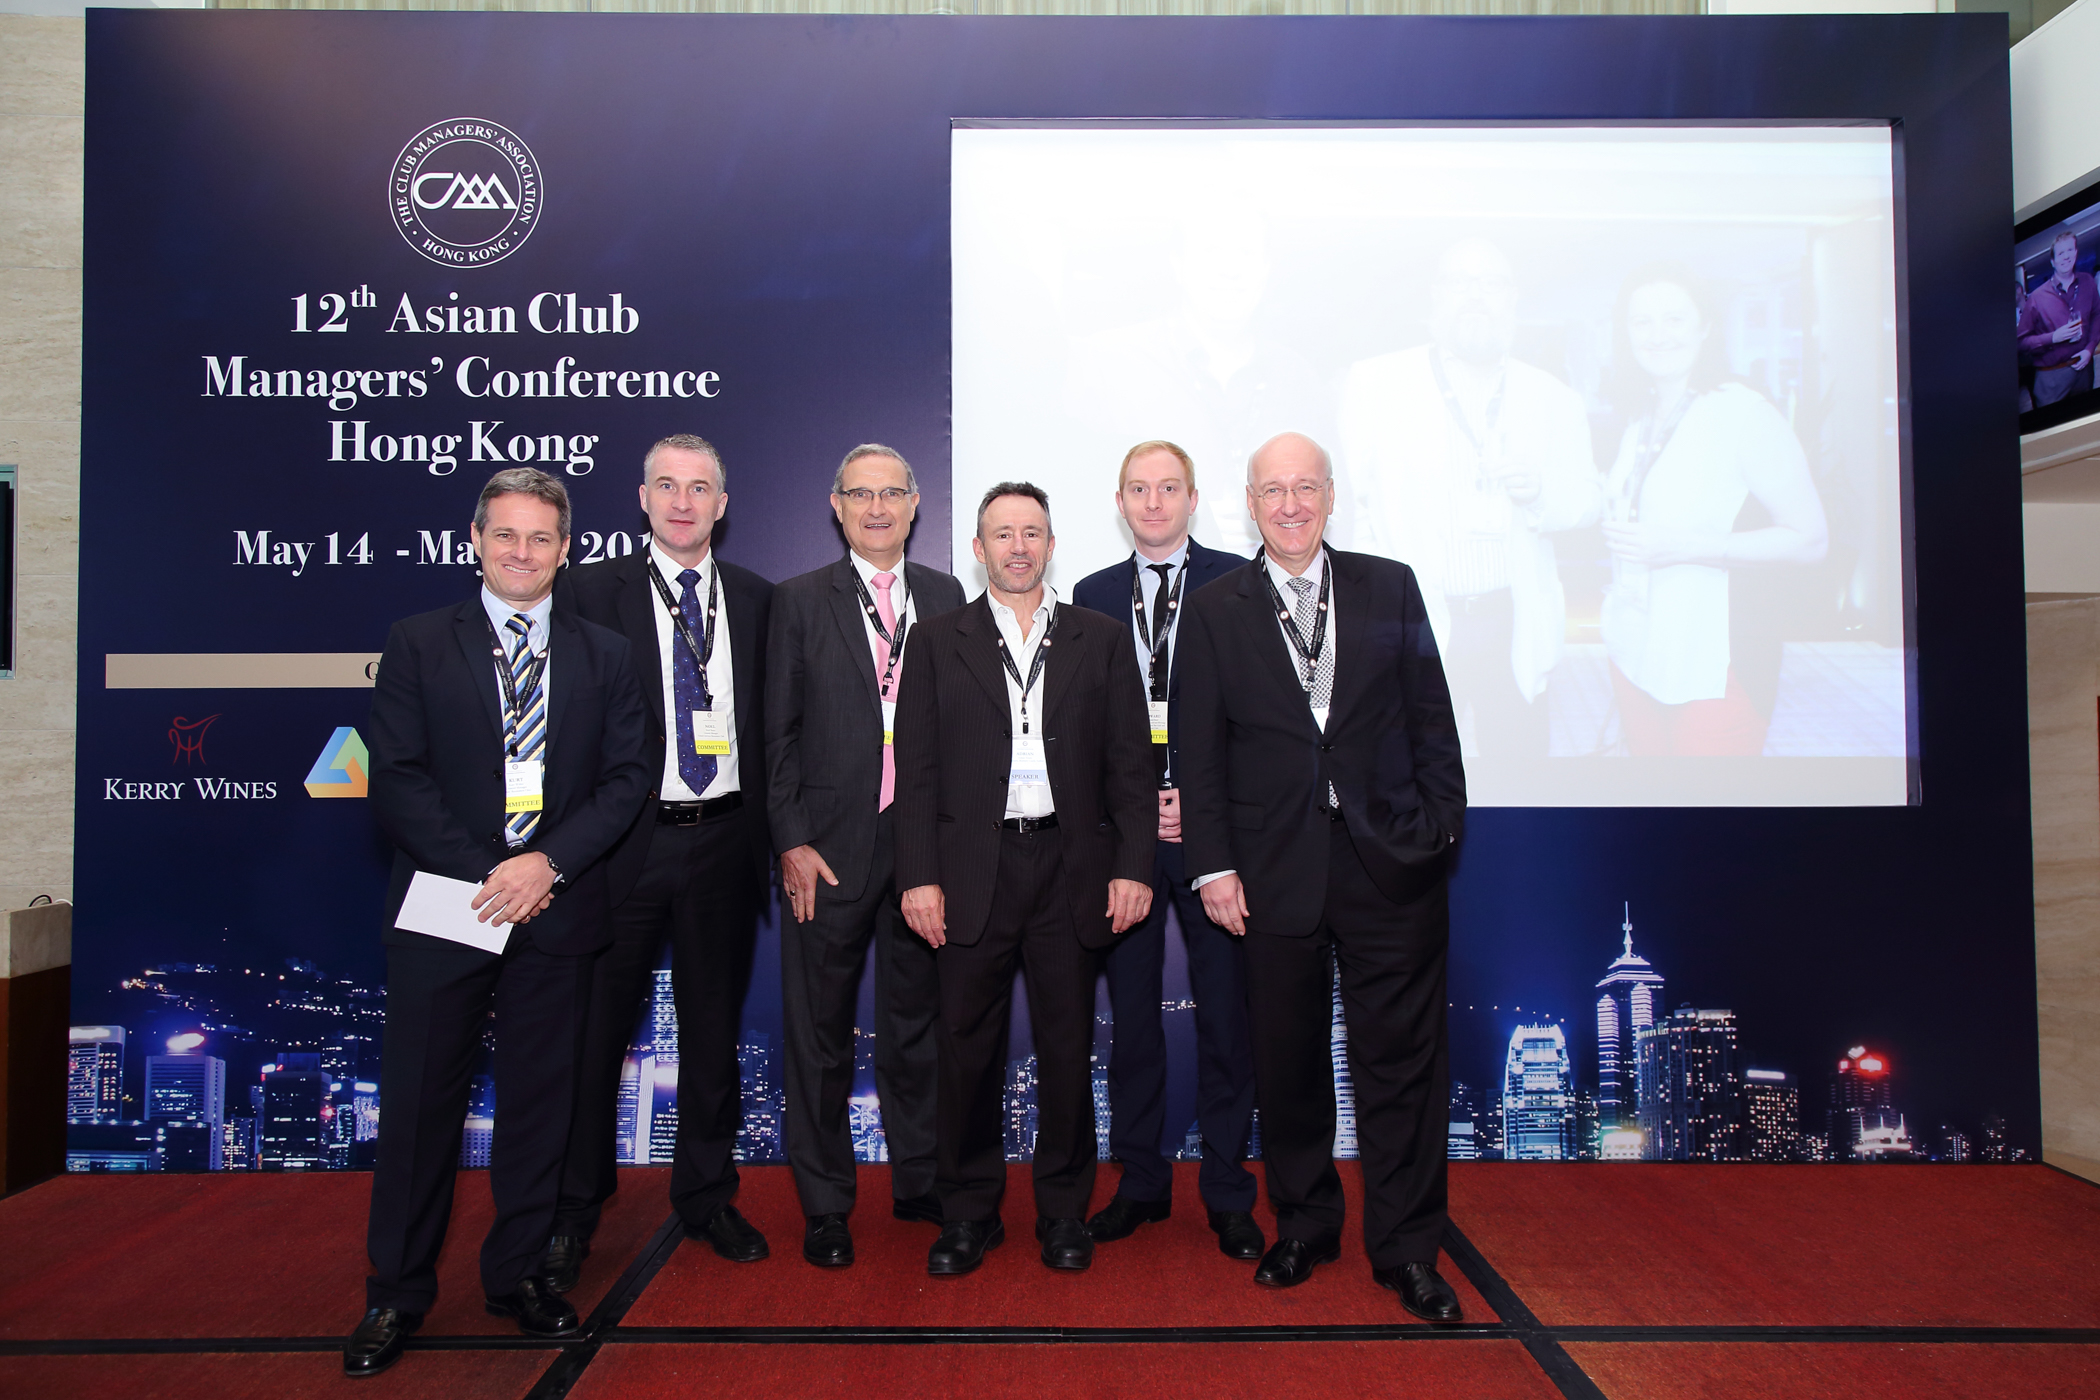 2022 Asian Club Managers' Conference